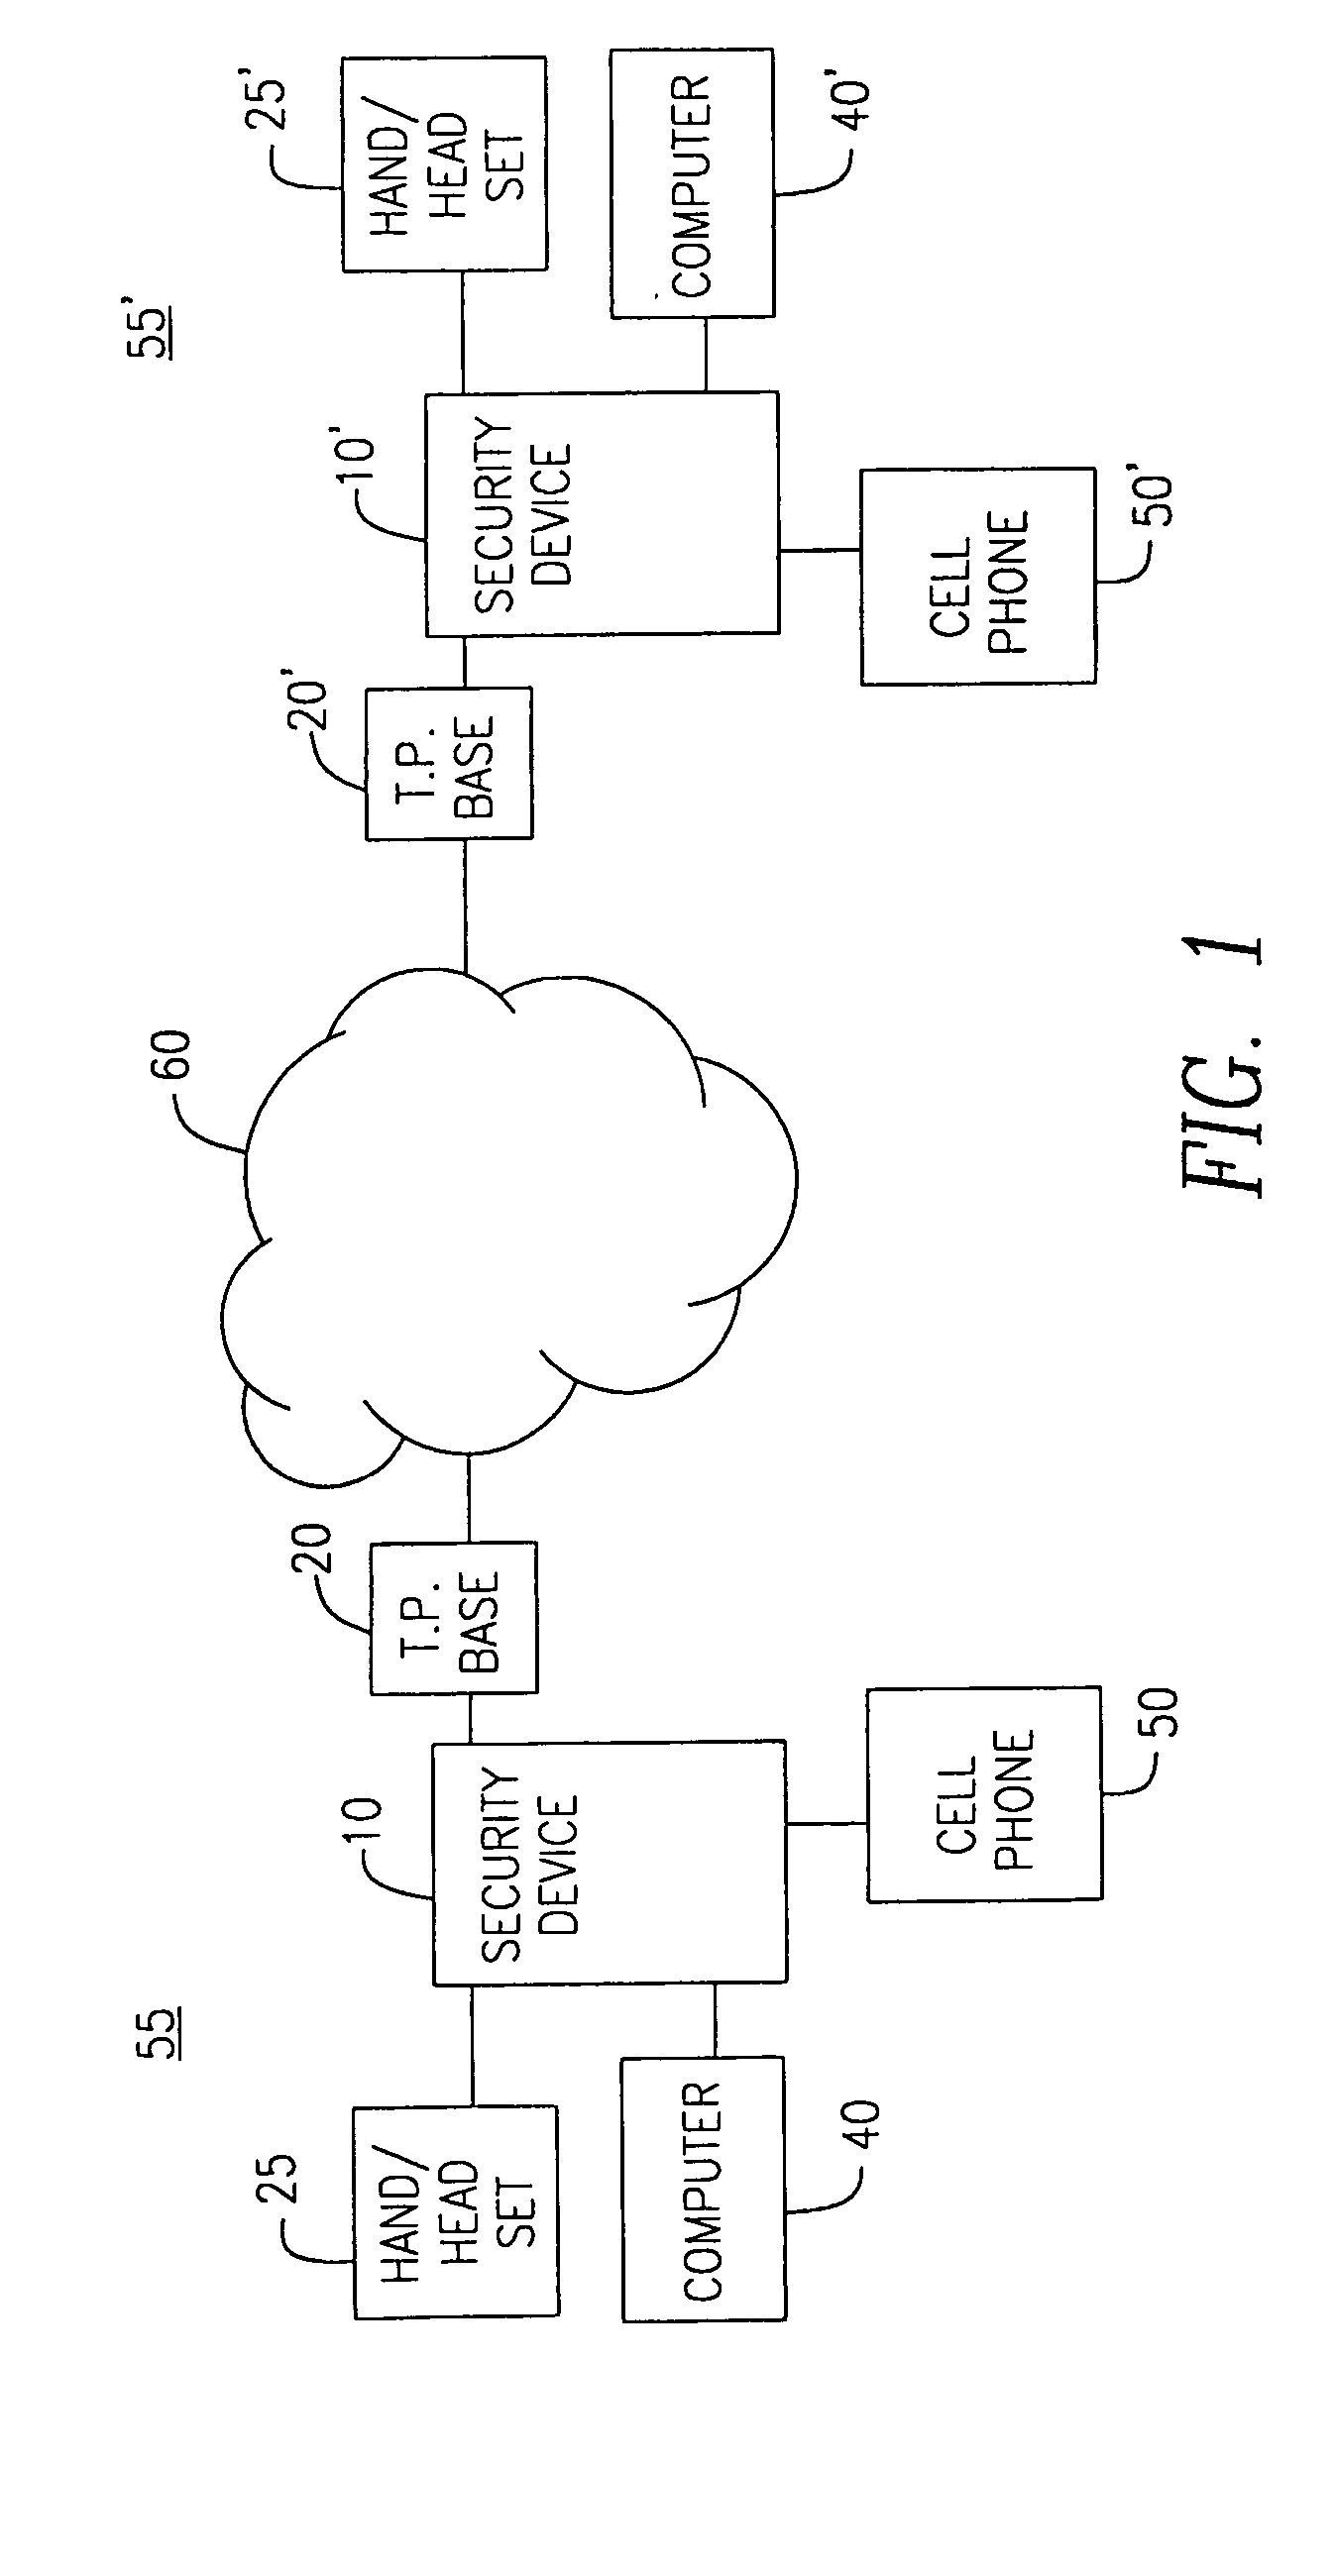 Portable telecommunication security device